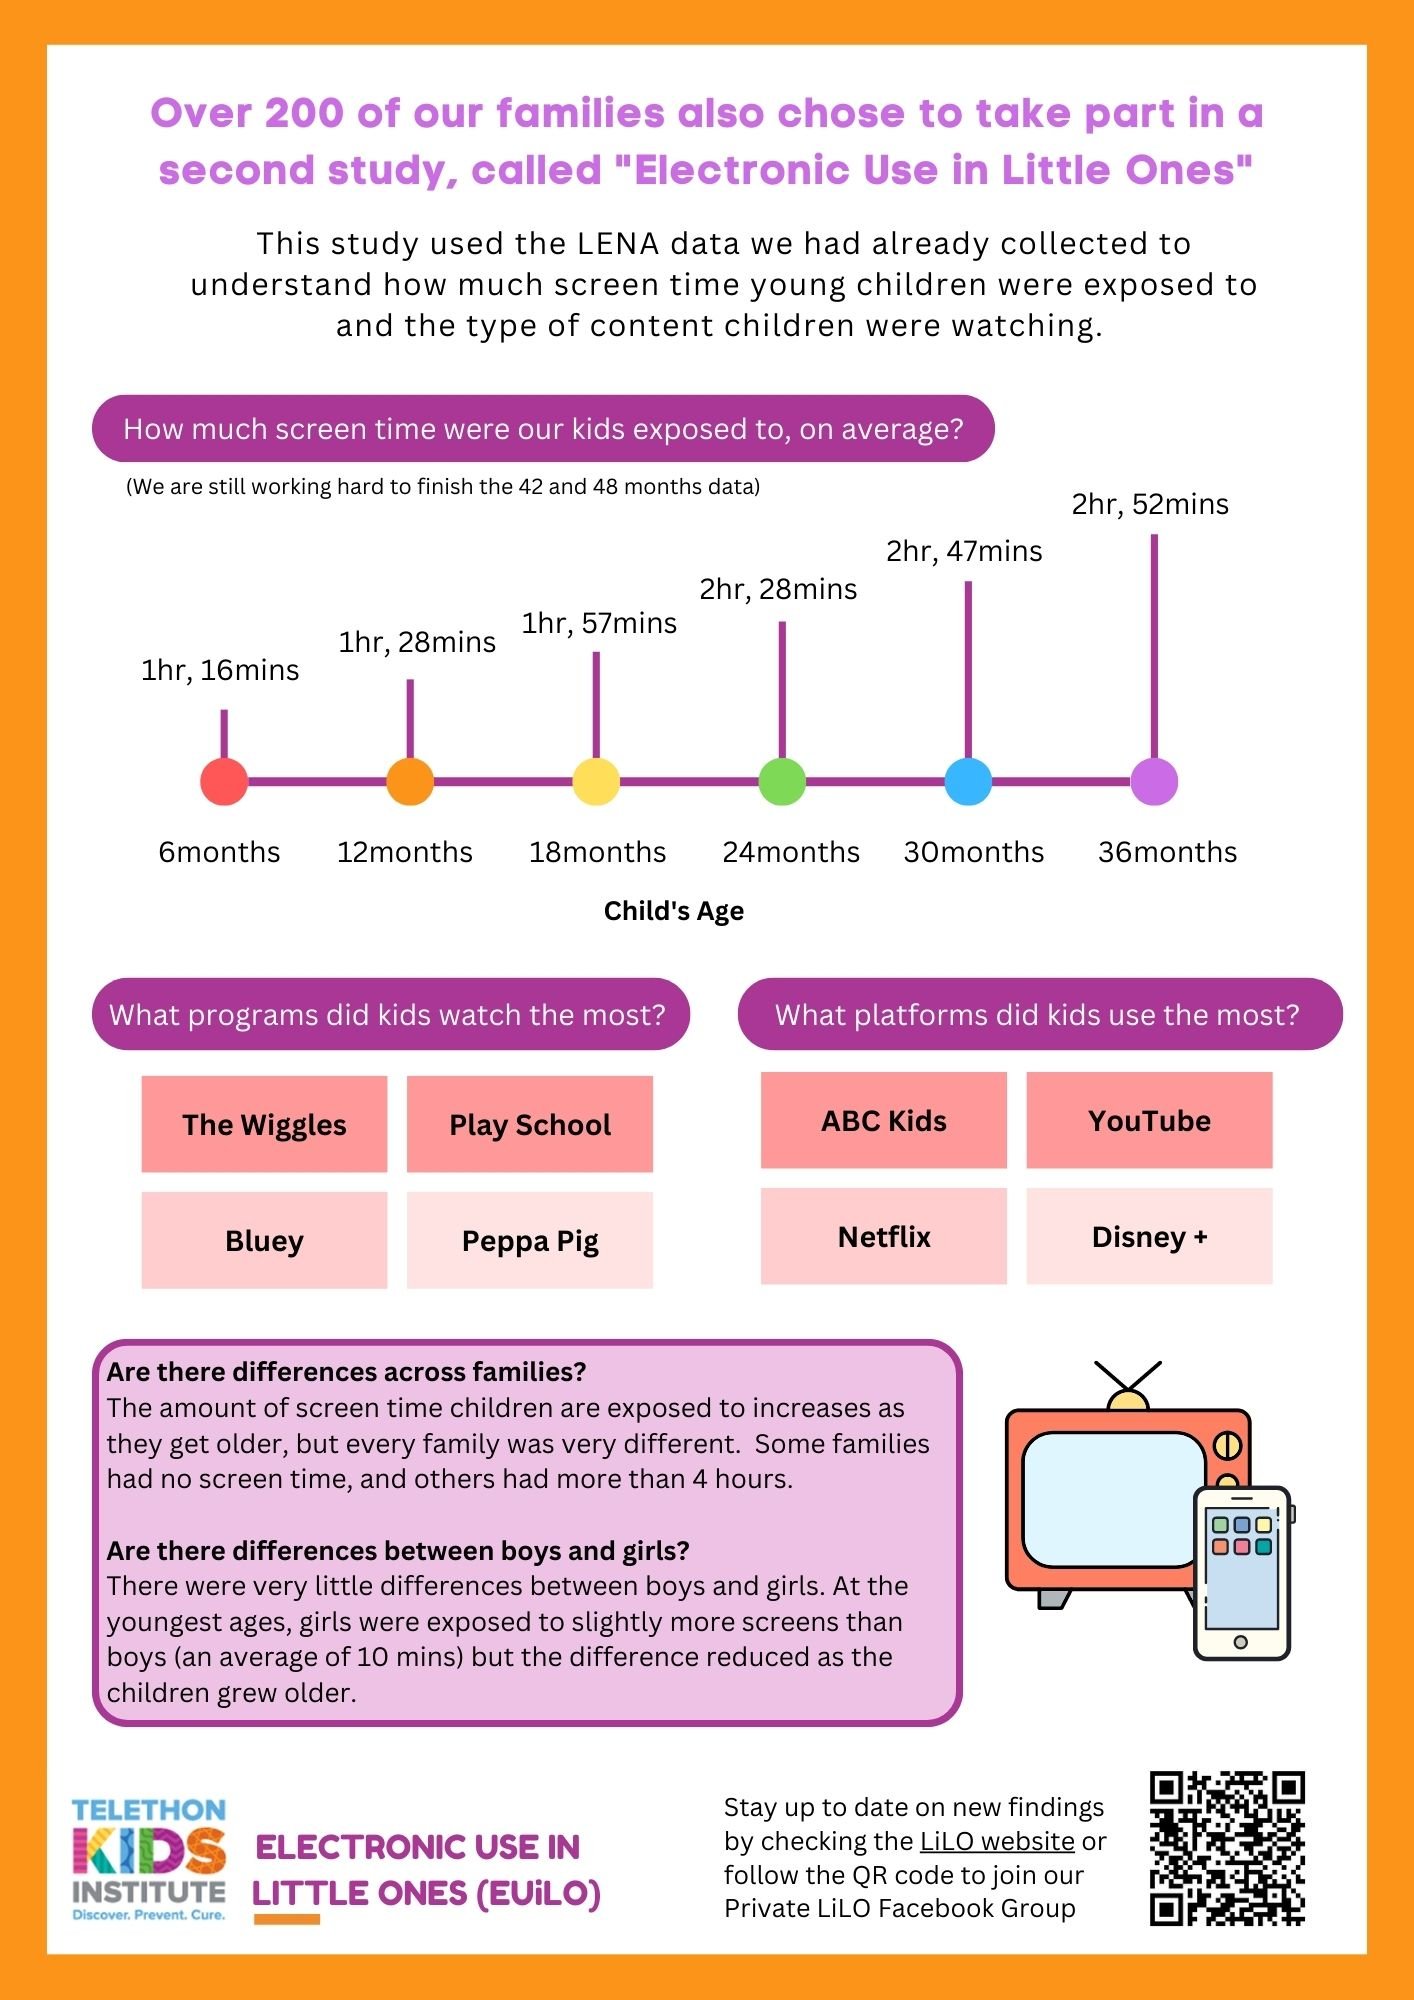 An infographic depicting some key findings from the electronic use in little ones study. It indicates that on average, the programs that kids watched the most were the wiggles and play school, followed by bluey and peppa pig. It indicates that platforms that kids used the most were ABC kids and youtube, followed by netflix and disney +. It indicates that the amount of screen time children are exposed to increases as they get older, but every family was very different. Some families had no screen time, and others had more than 4 hours. It indicates that there were very little differences between boys and girls. At the youngest ages, girls were exposed to slightly more screens than boys (an average of 10 mins), but the difference reduced as the children grew older.